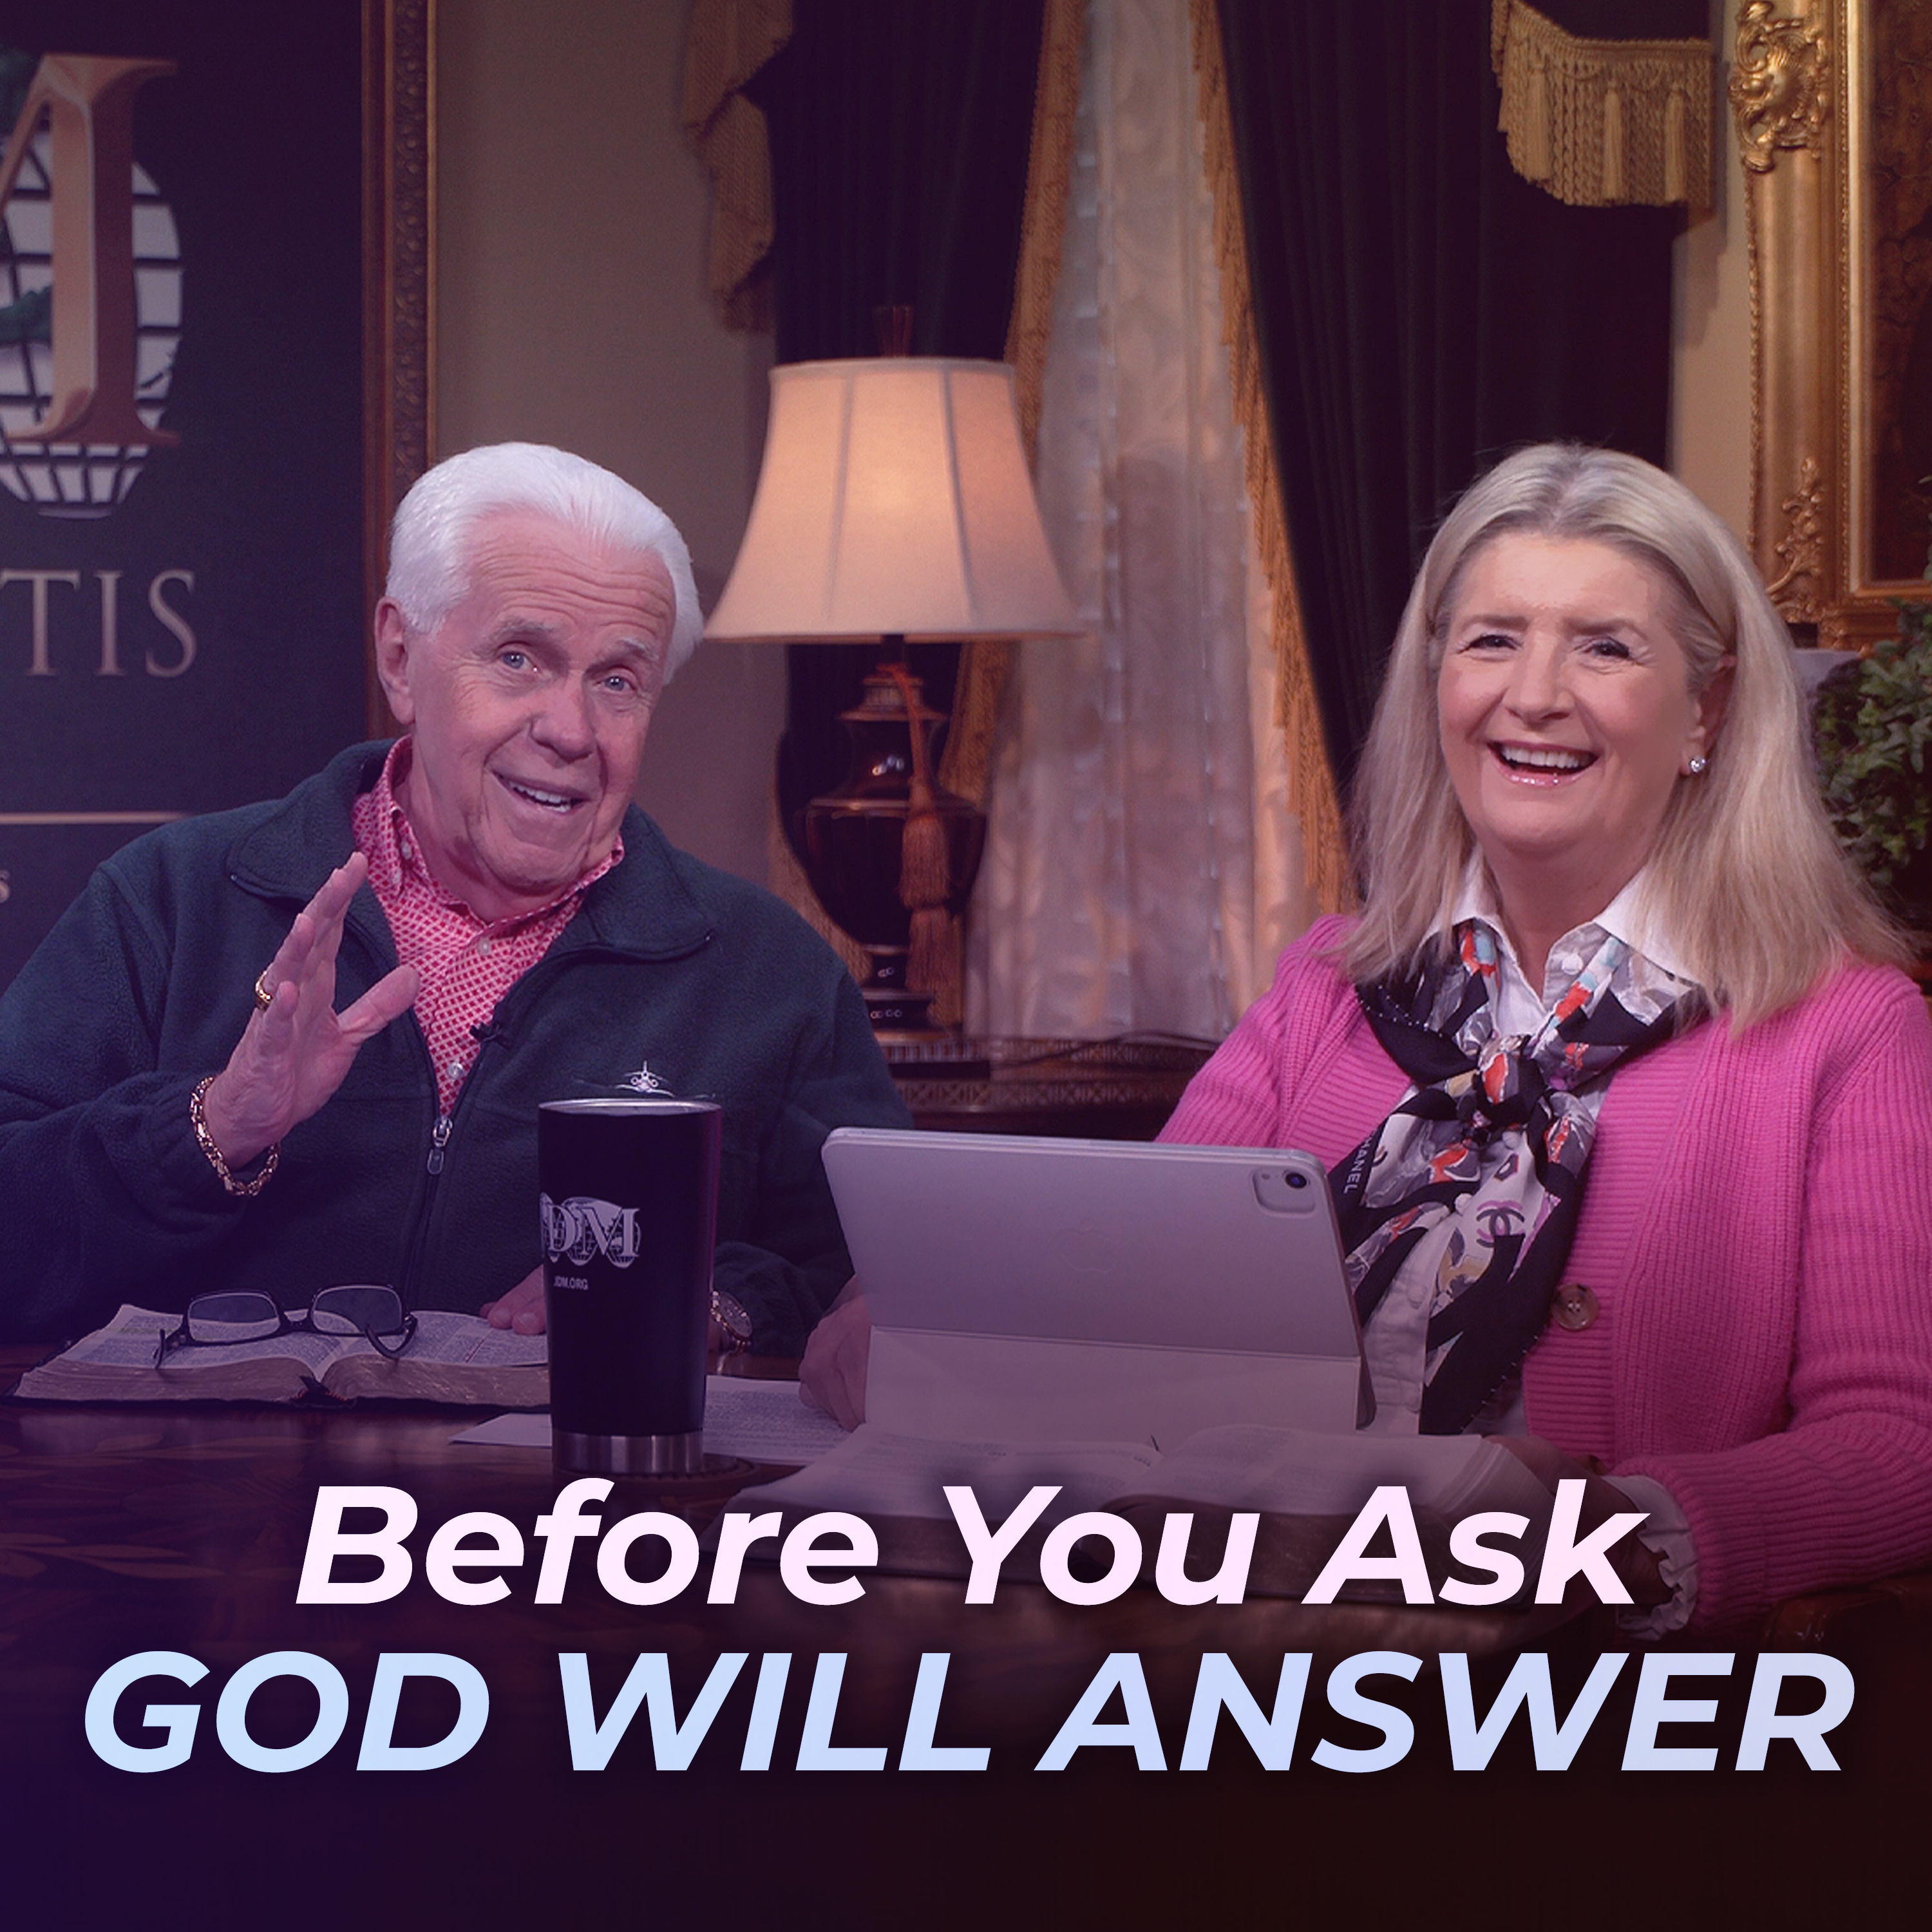 Before You Ask, God Will Answer